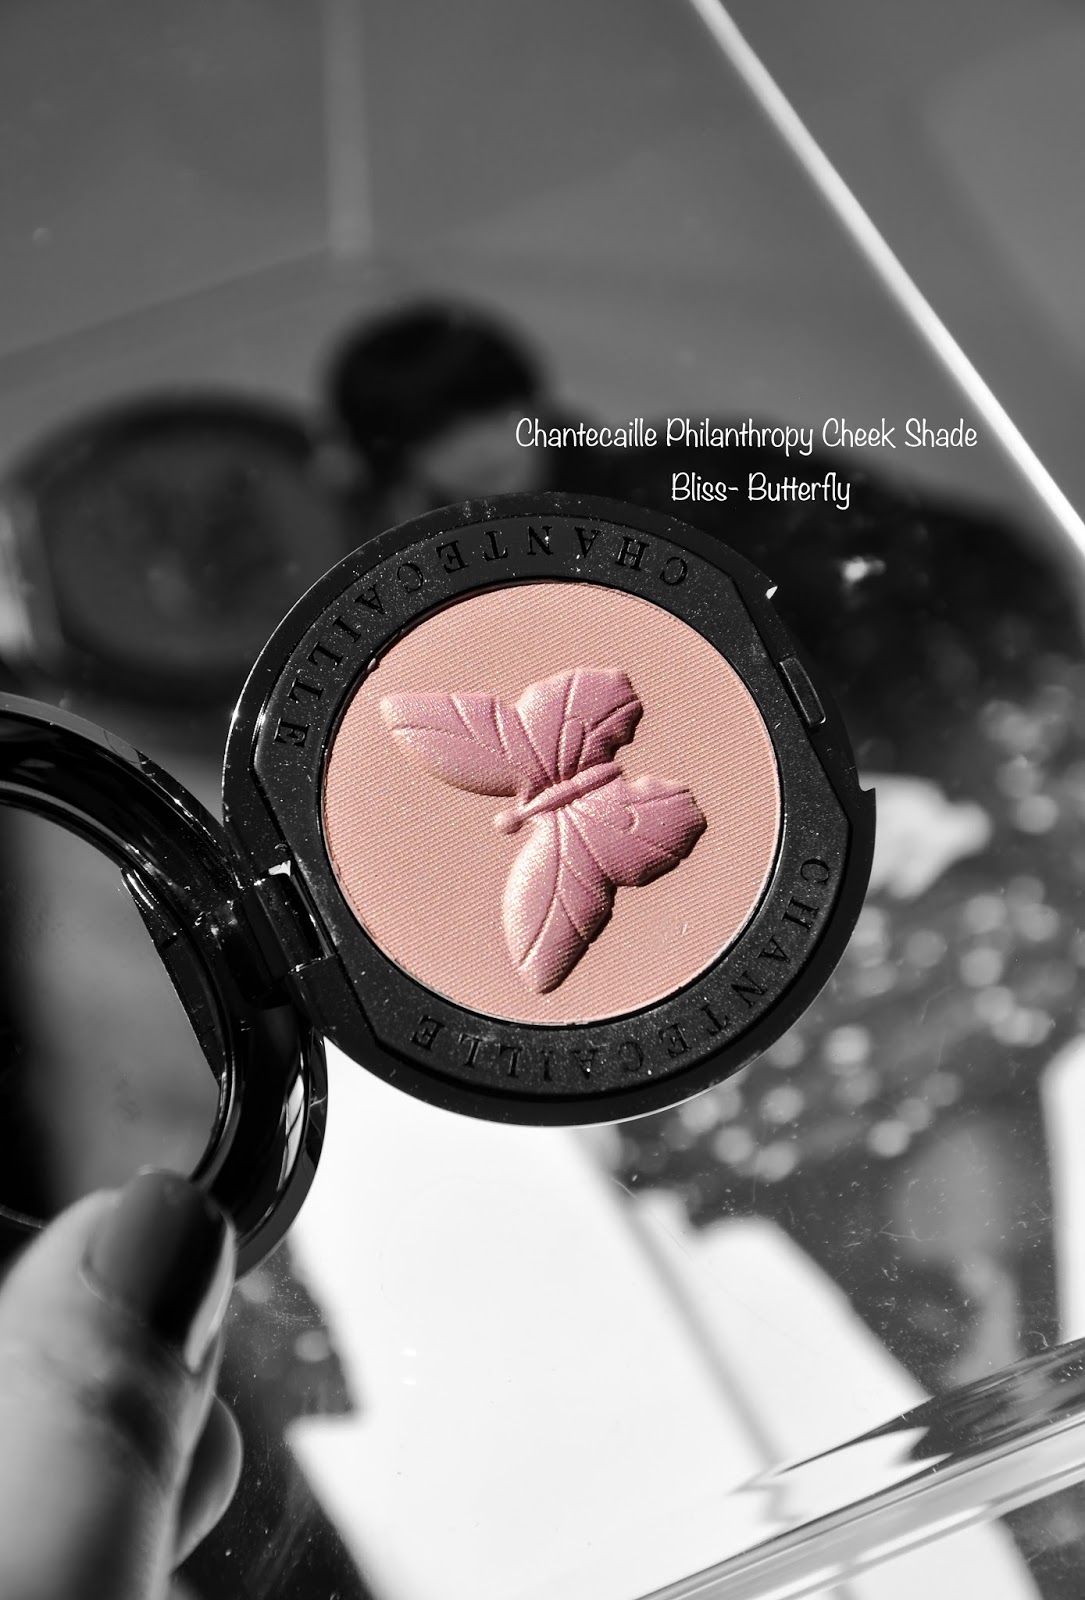 Chantecaille Philanthropy Cheek Shade Bliss-Butterfly swatches